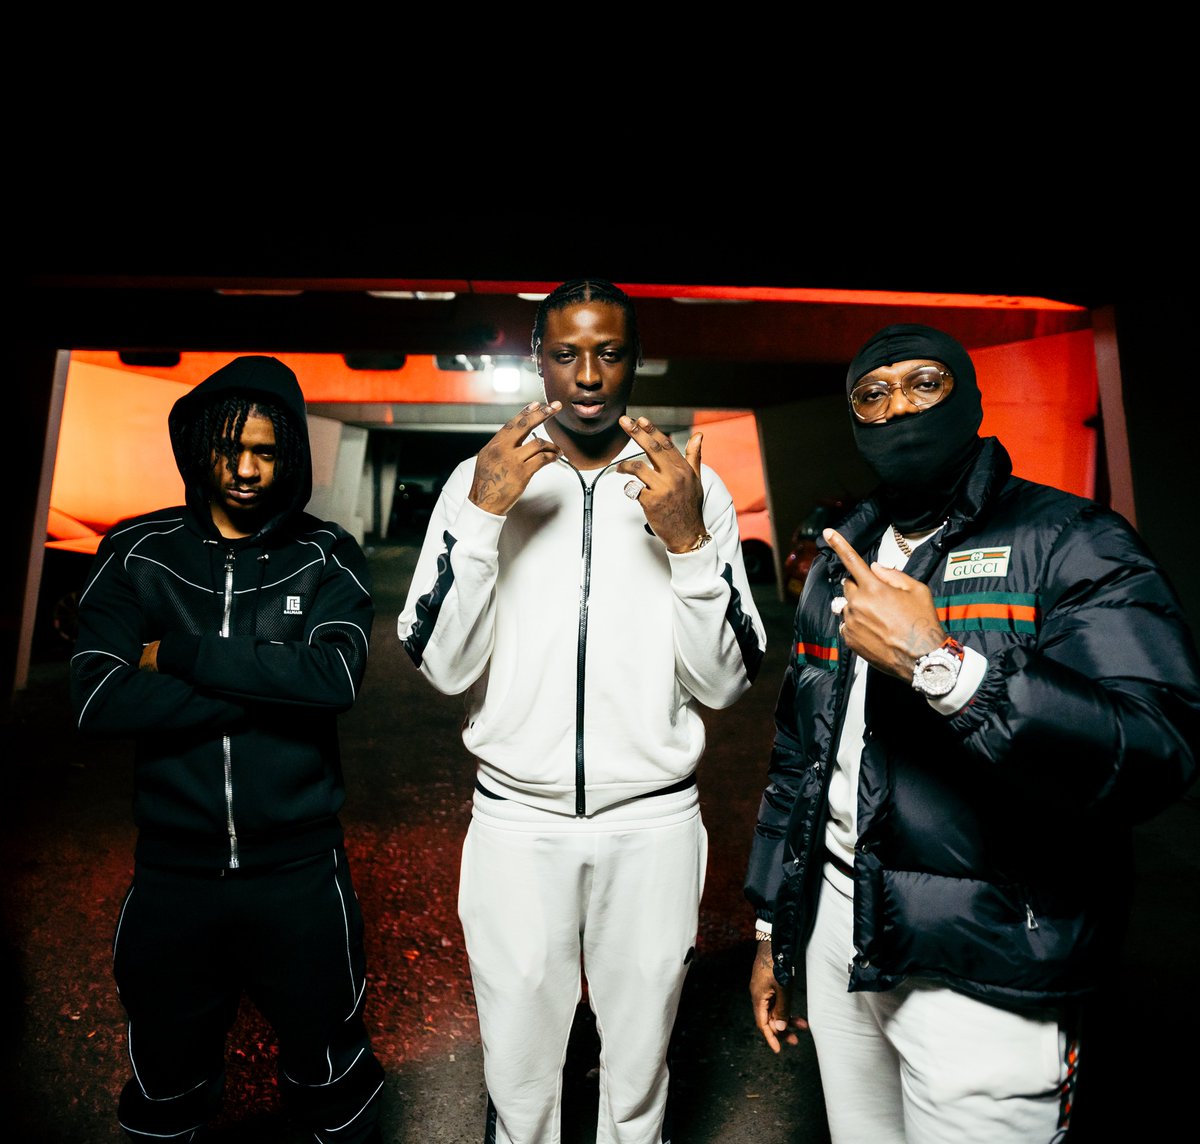 .@abznoproblem17 is 'Local' with @HeadieOne and Bandokay for his latest track 📍spoti.fi/NMFUK